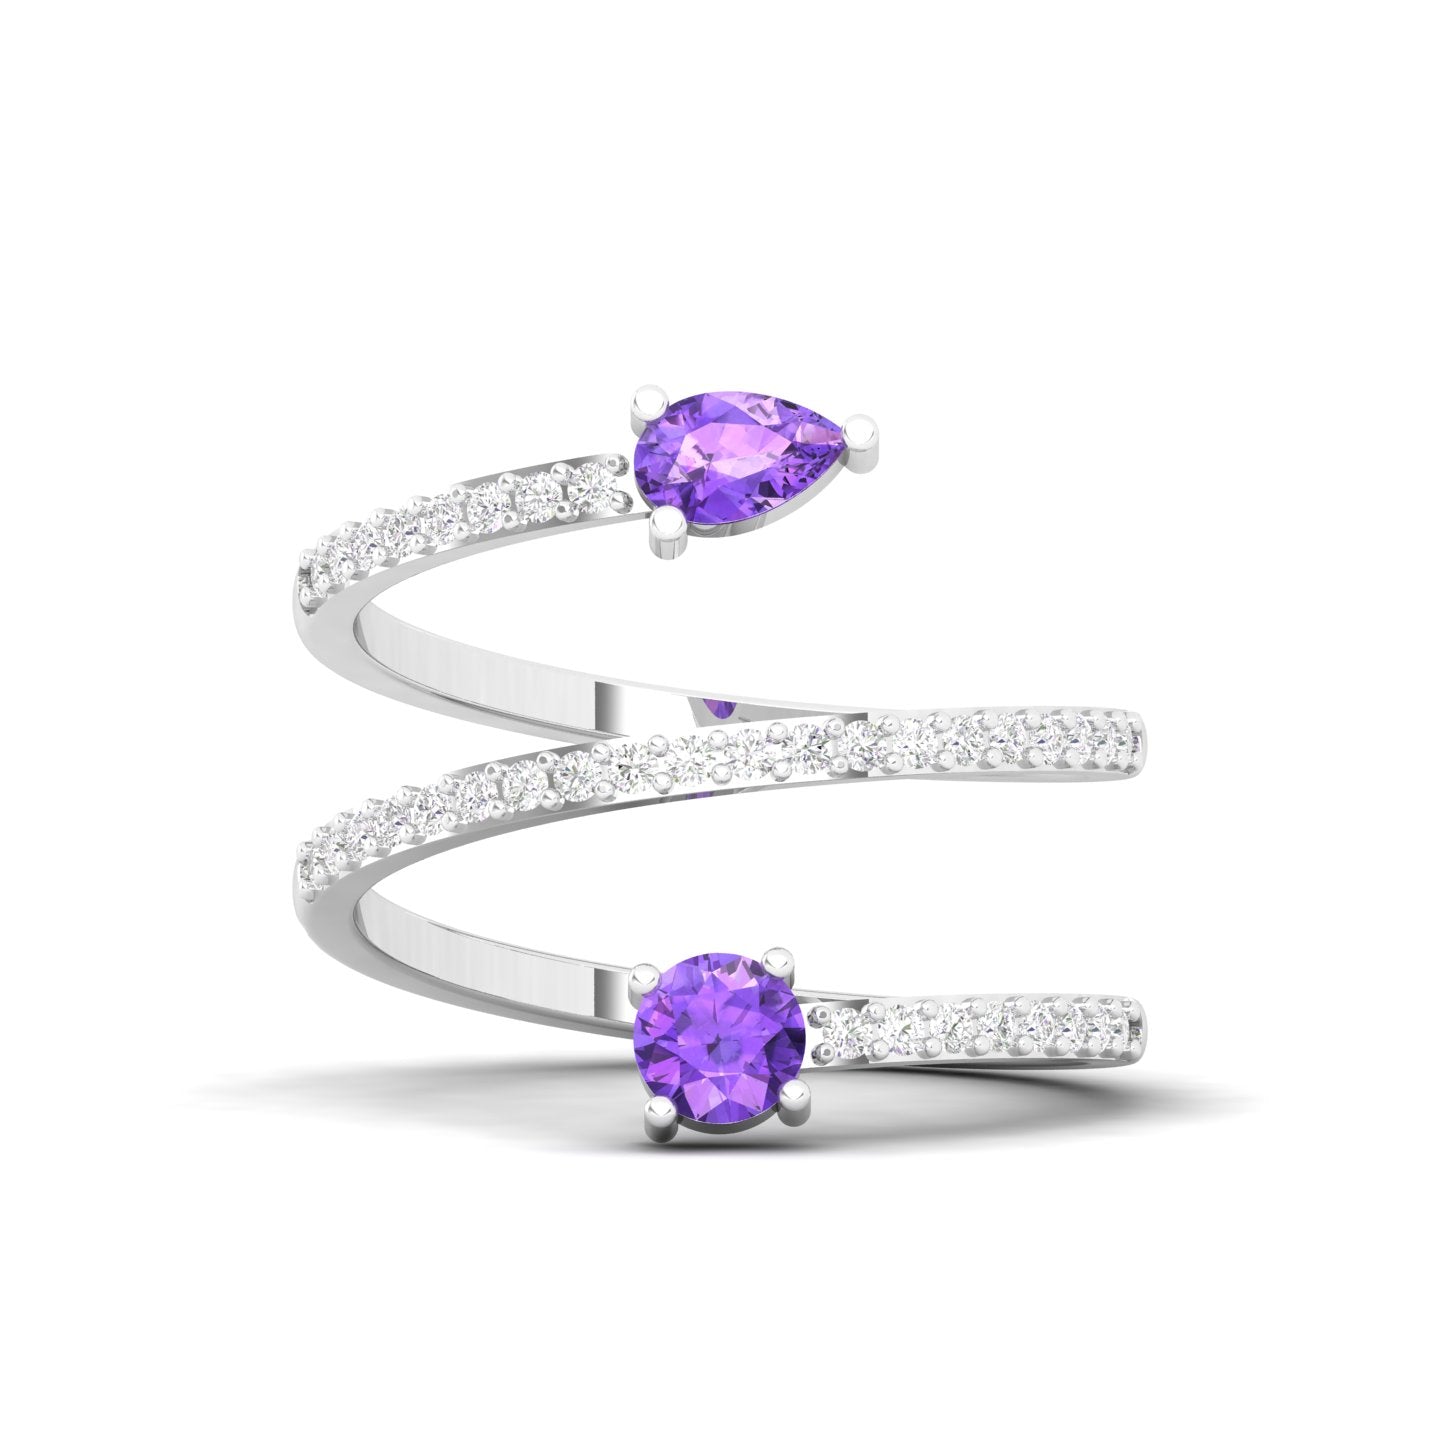 Maurya Twisted Pave-Set Diamond and Amethyst Repente Cocktail Ring